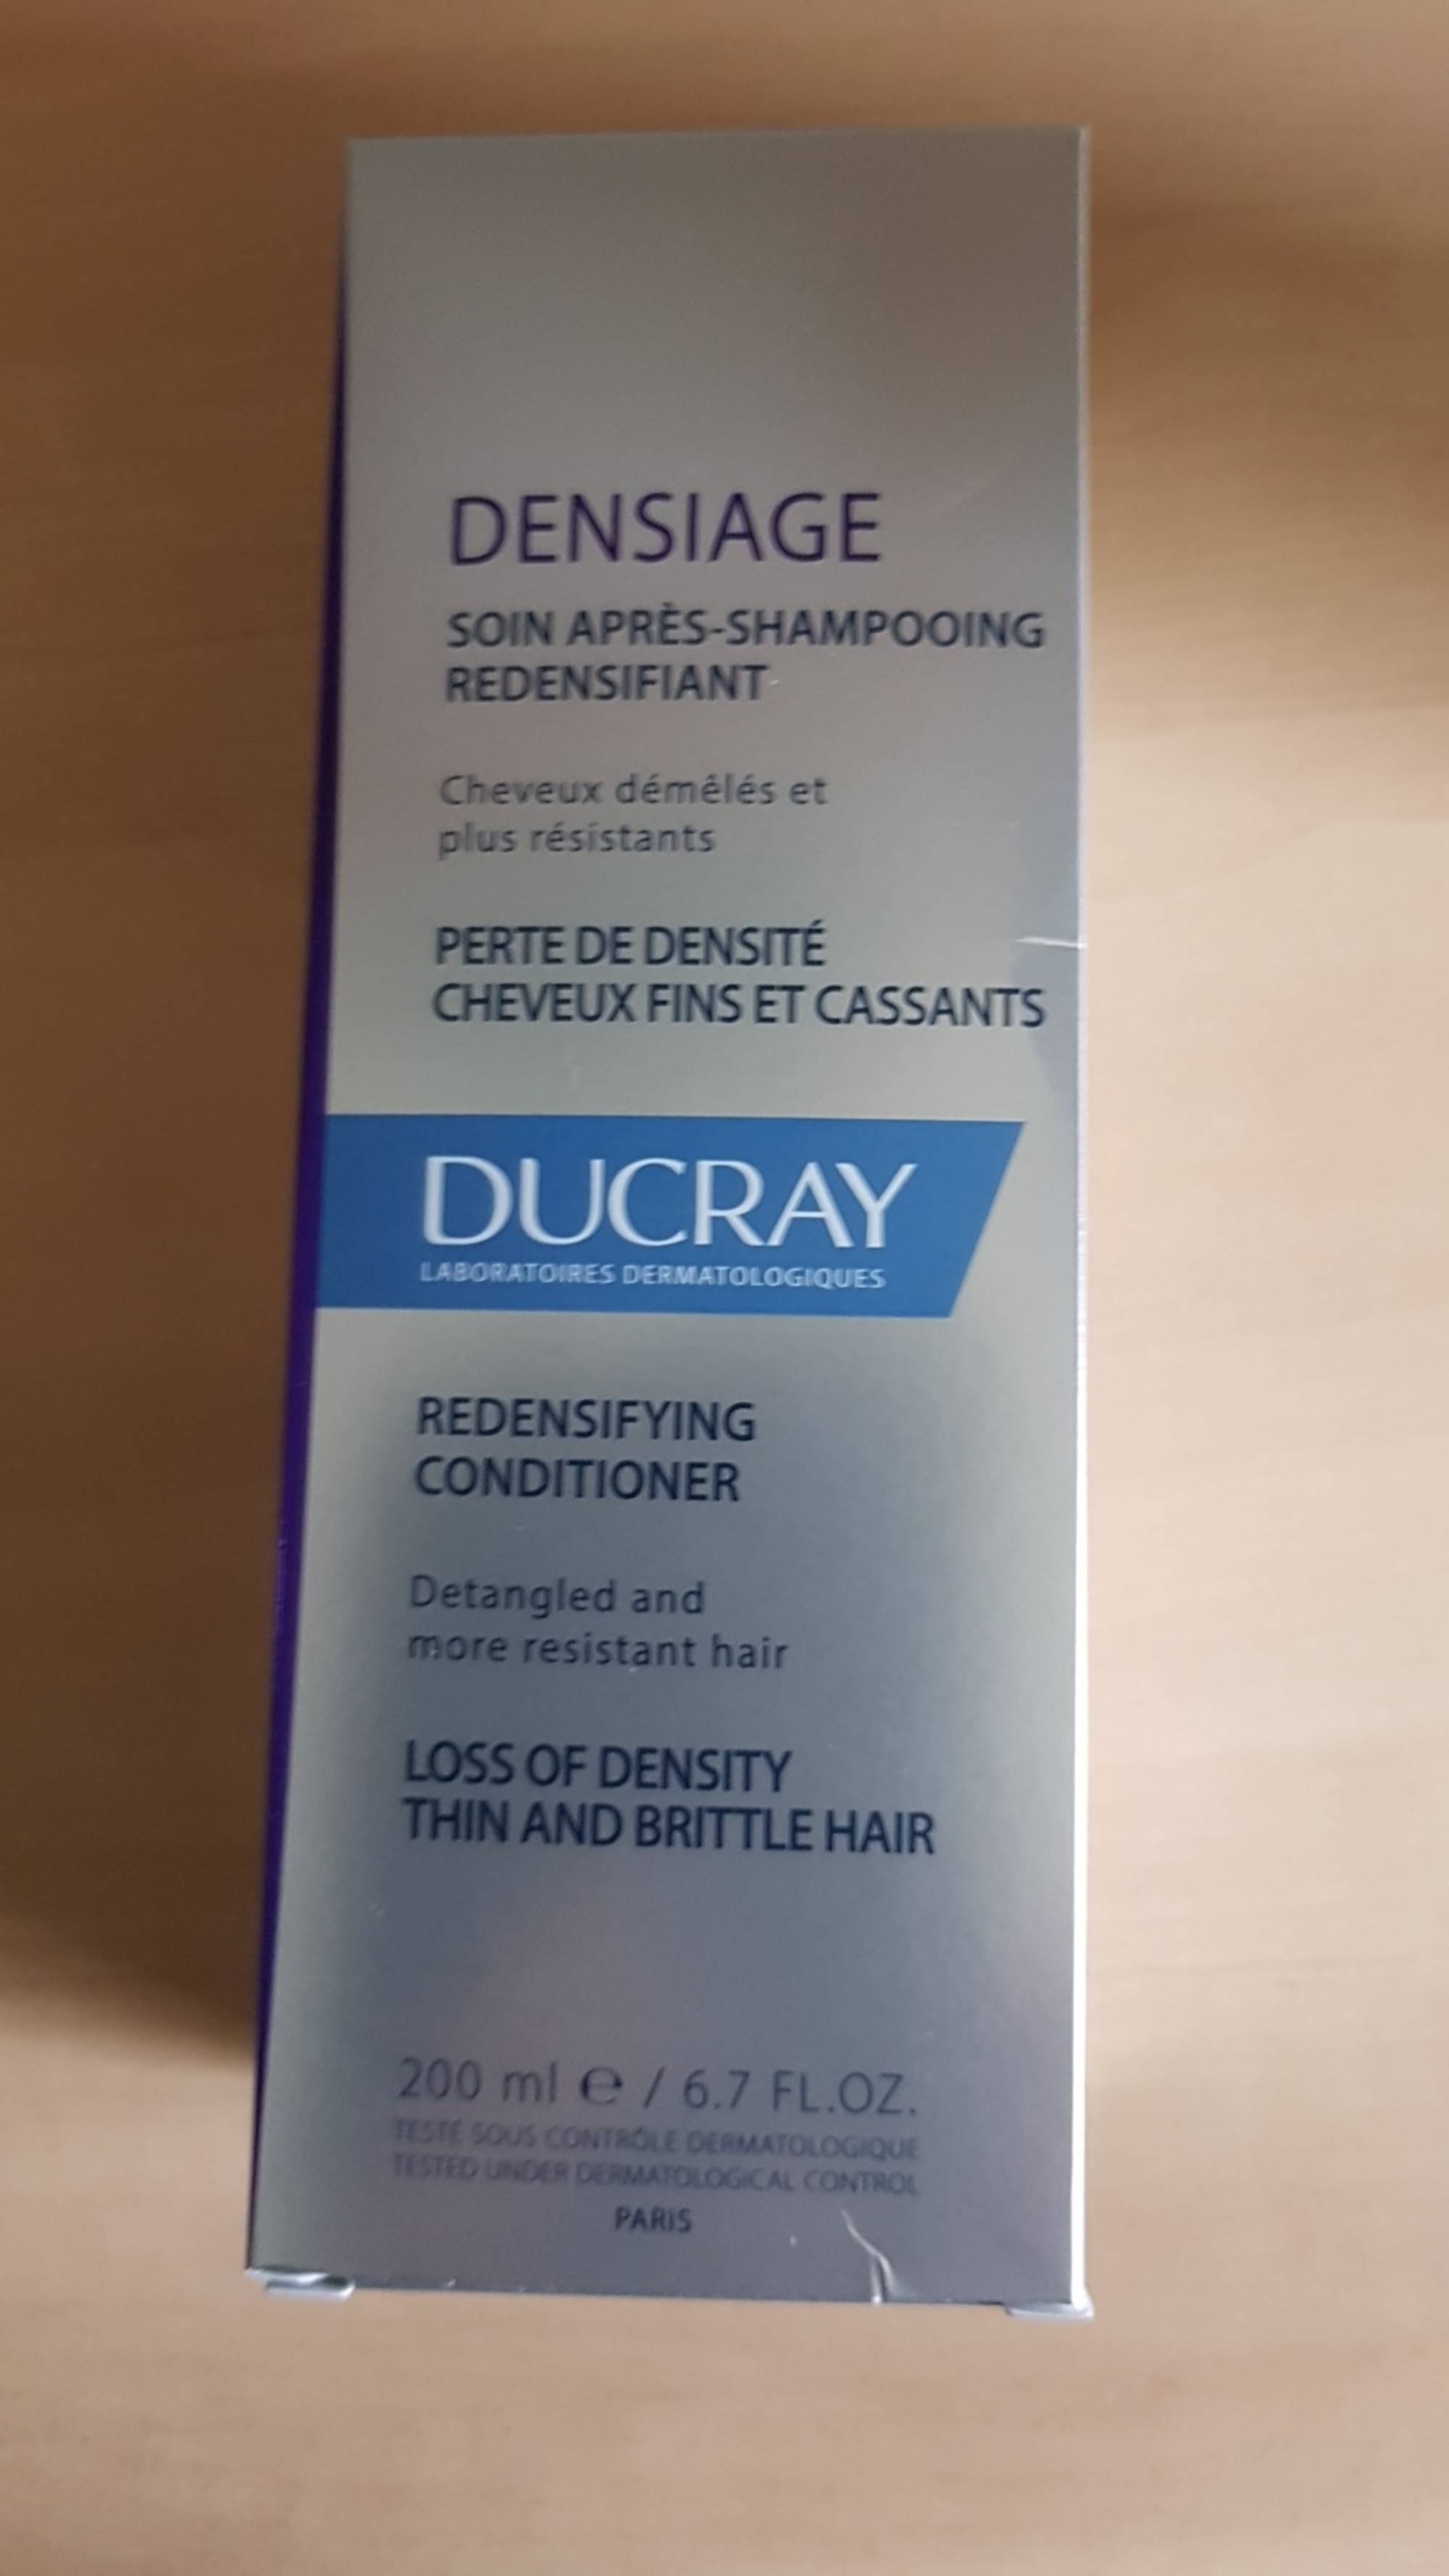 DUCRAY - Densiage - Soin après-shampooing redensifiant